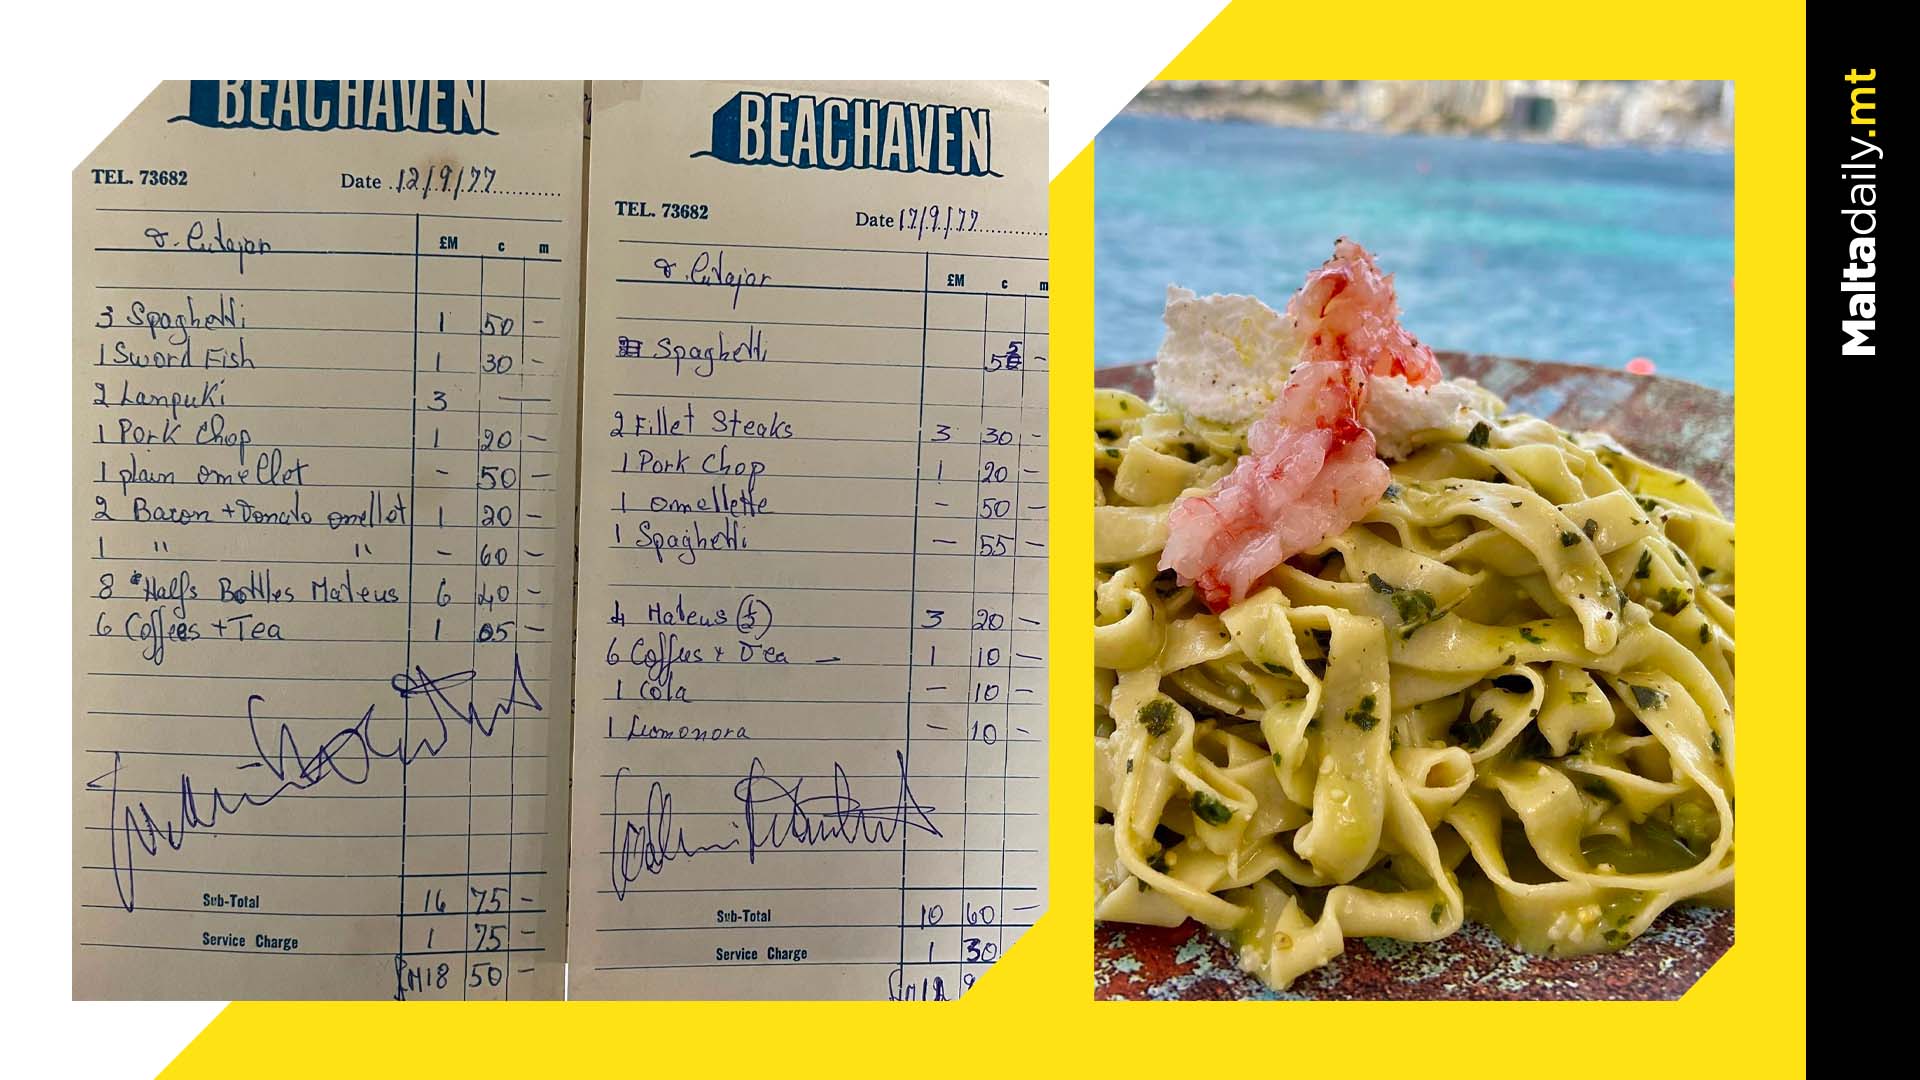 1977 Beachaven receipts show differences in food prices